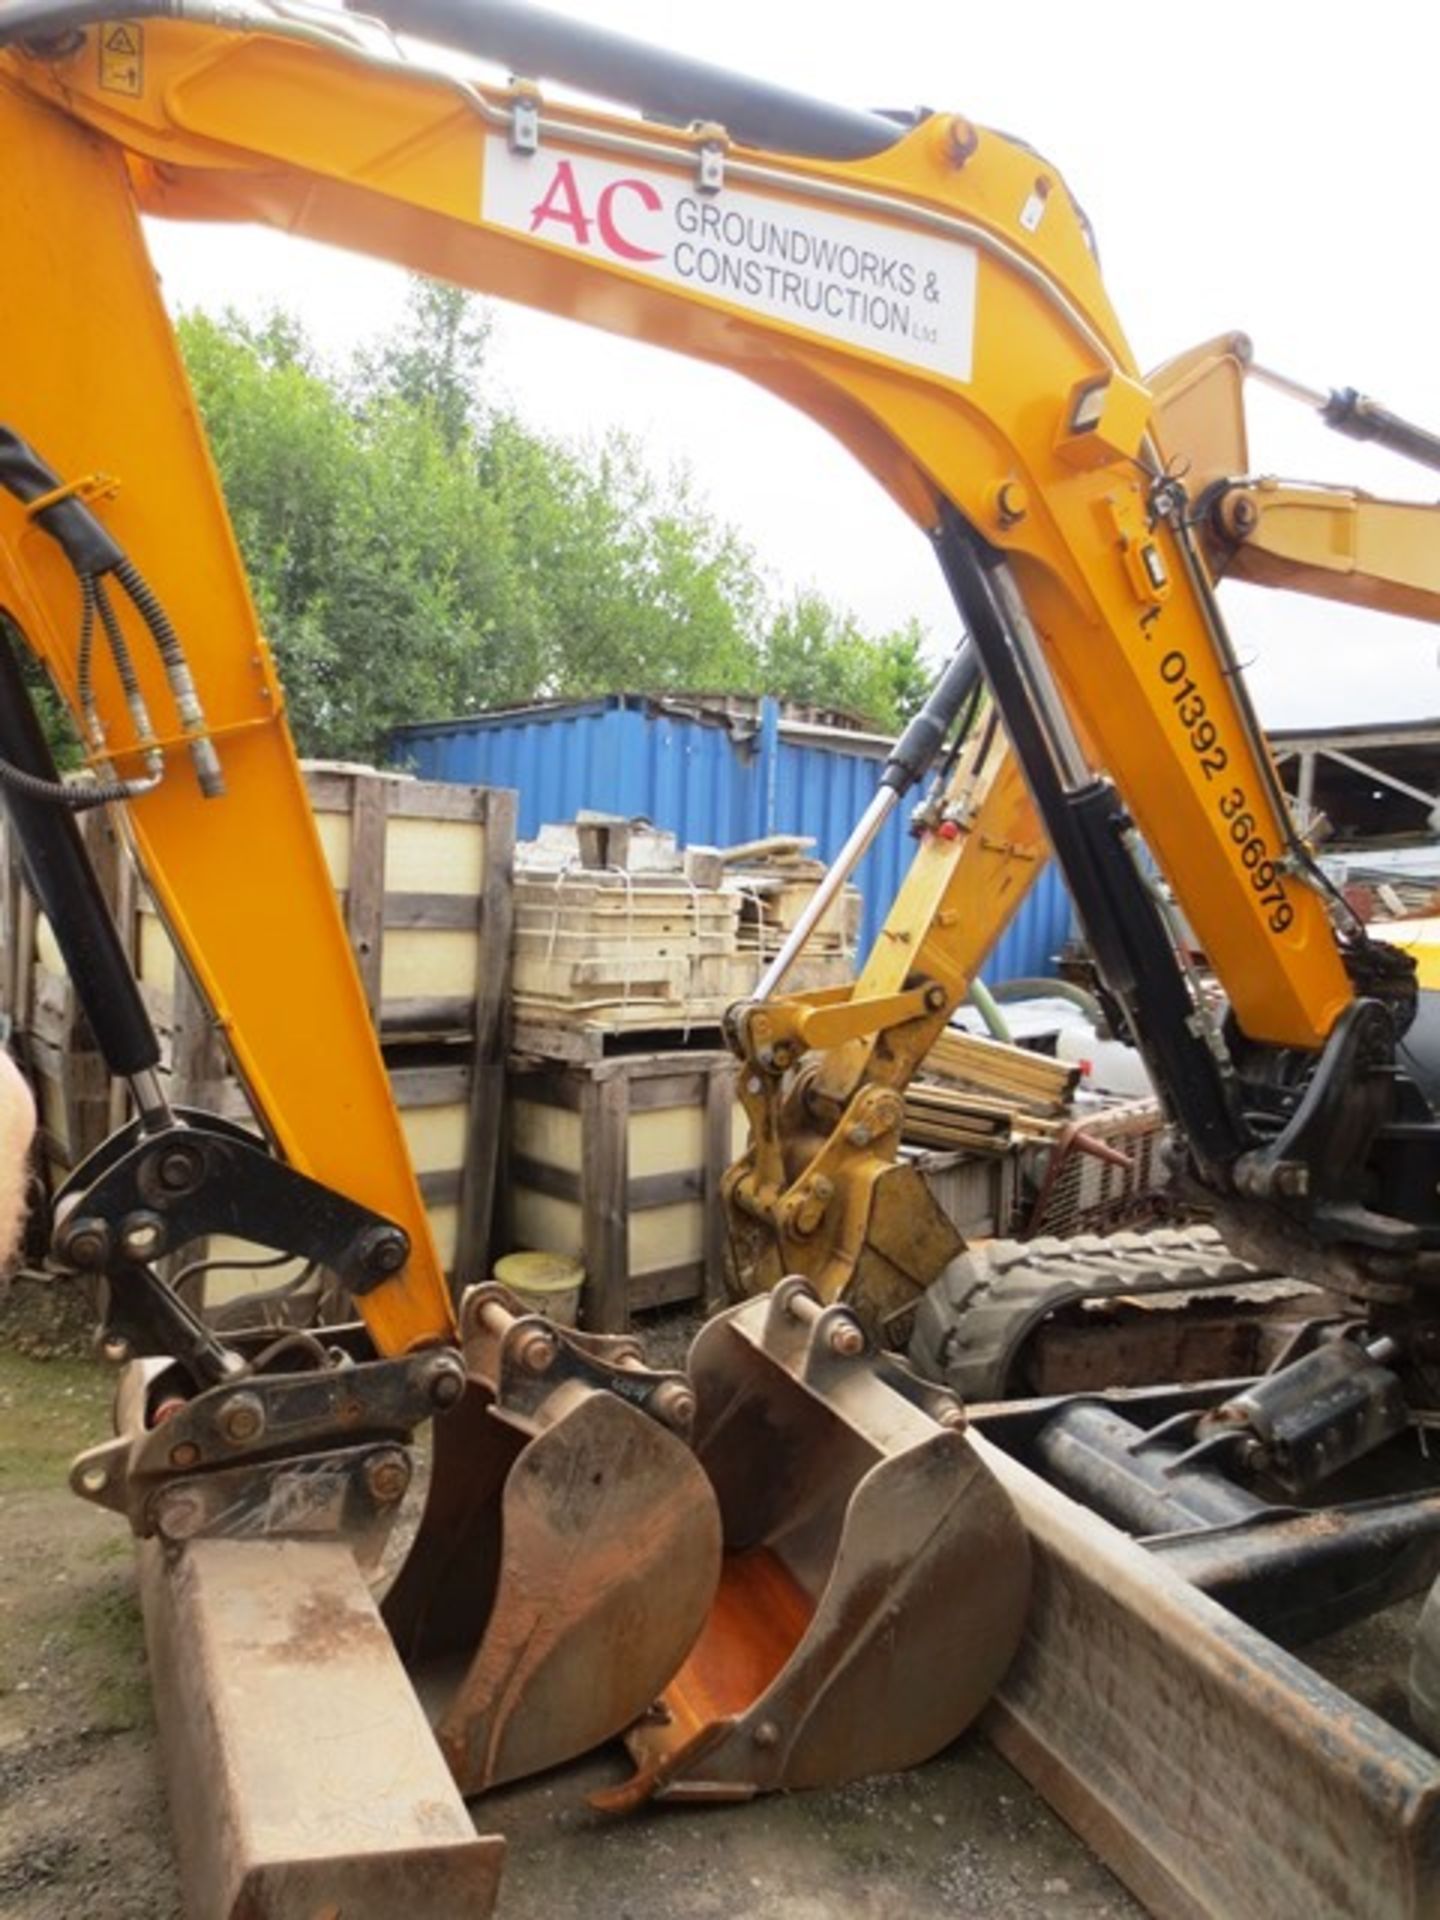 JCB 86C-1 rubber tracked midi hydraulic excavator with front dozer, product ID No: JCB086C1A02249723 - Image 12 of 19